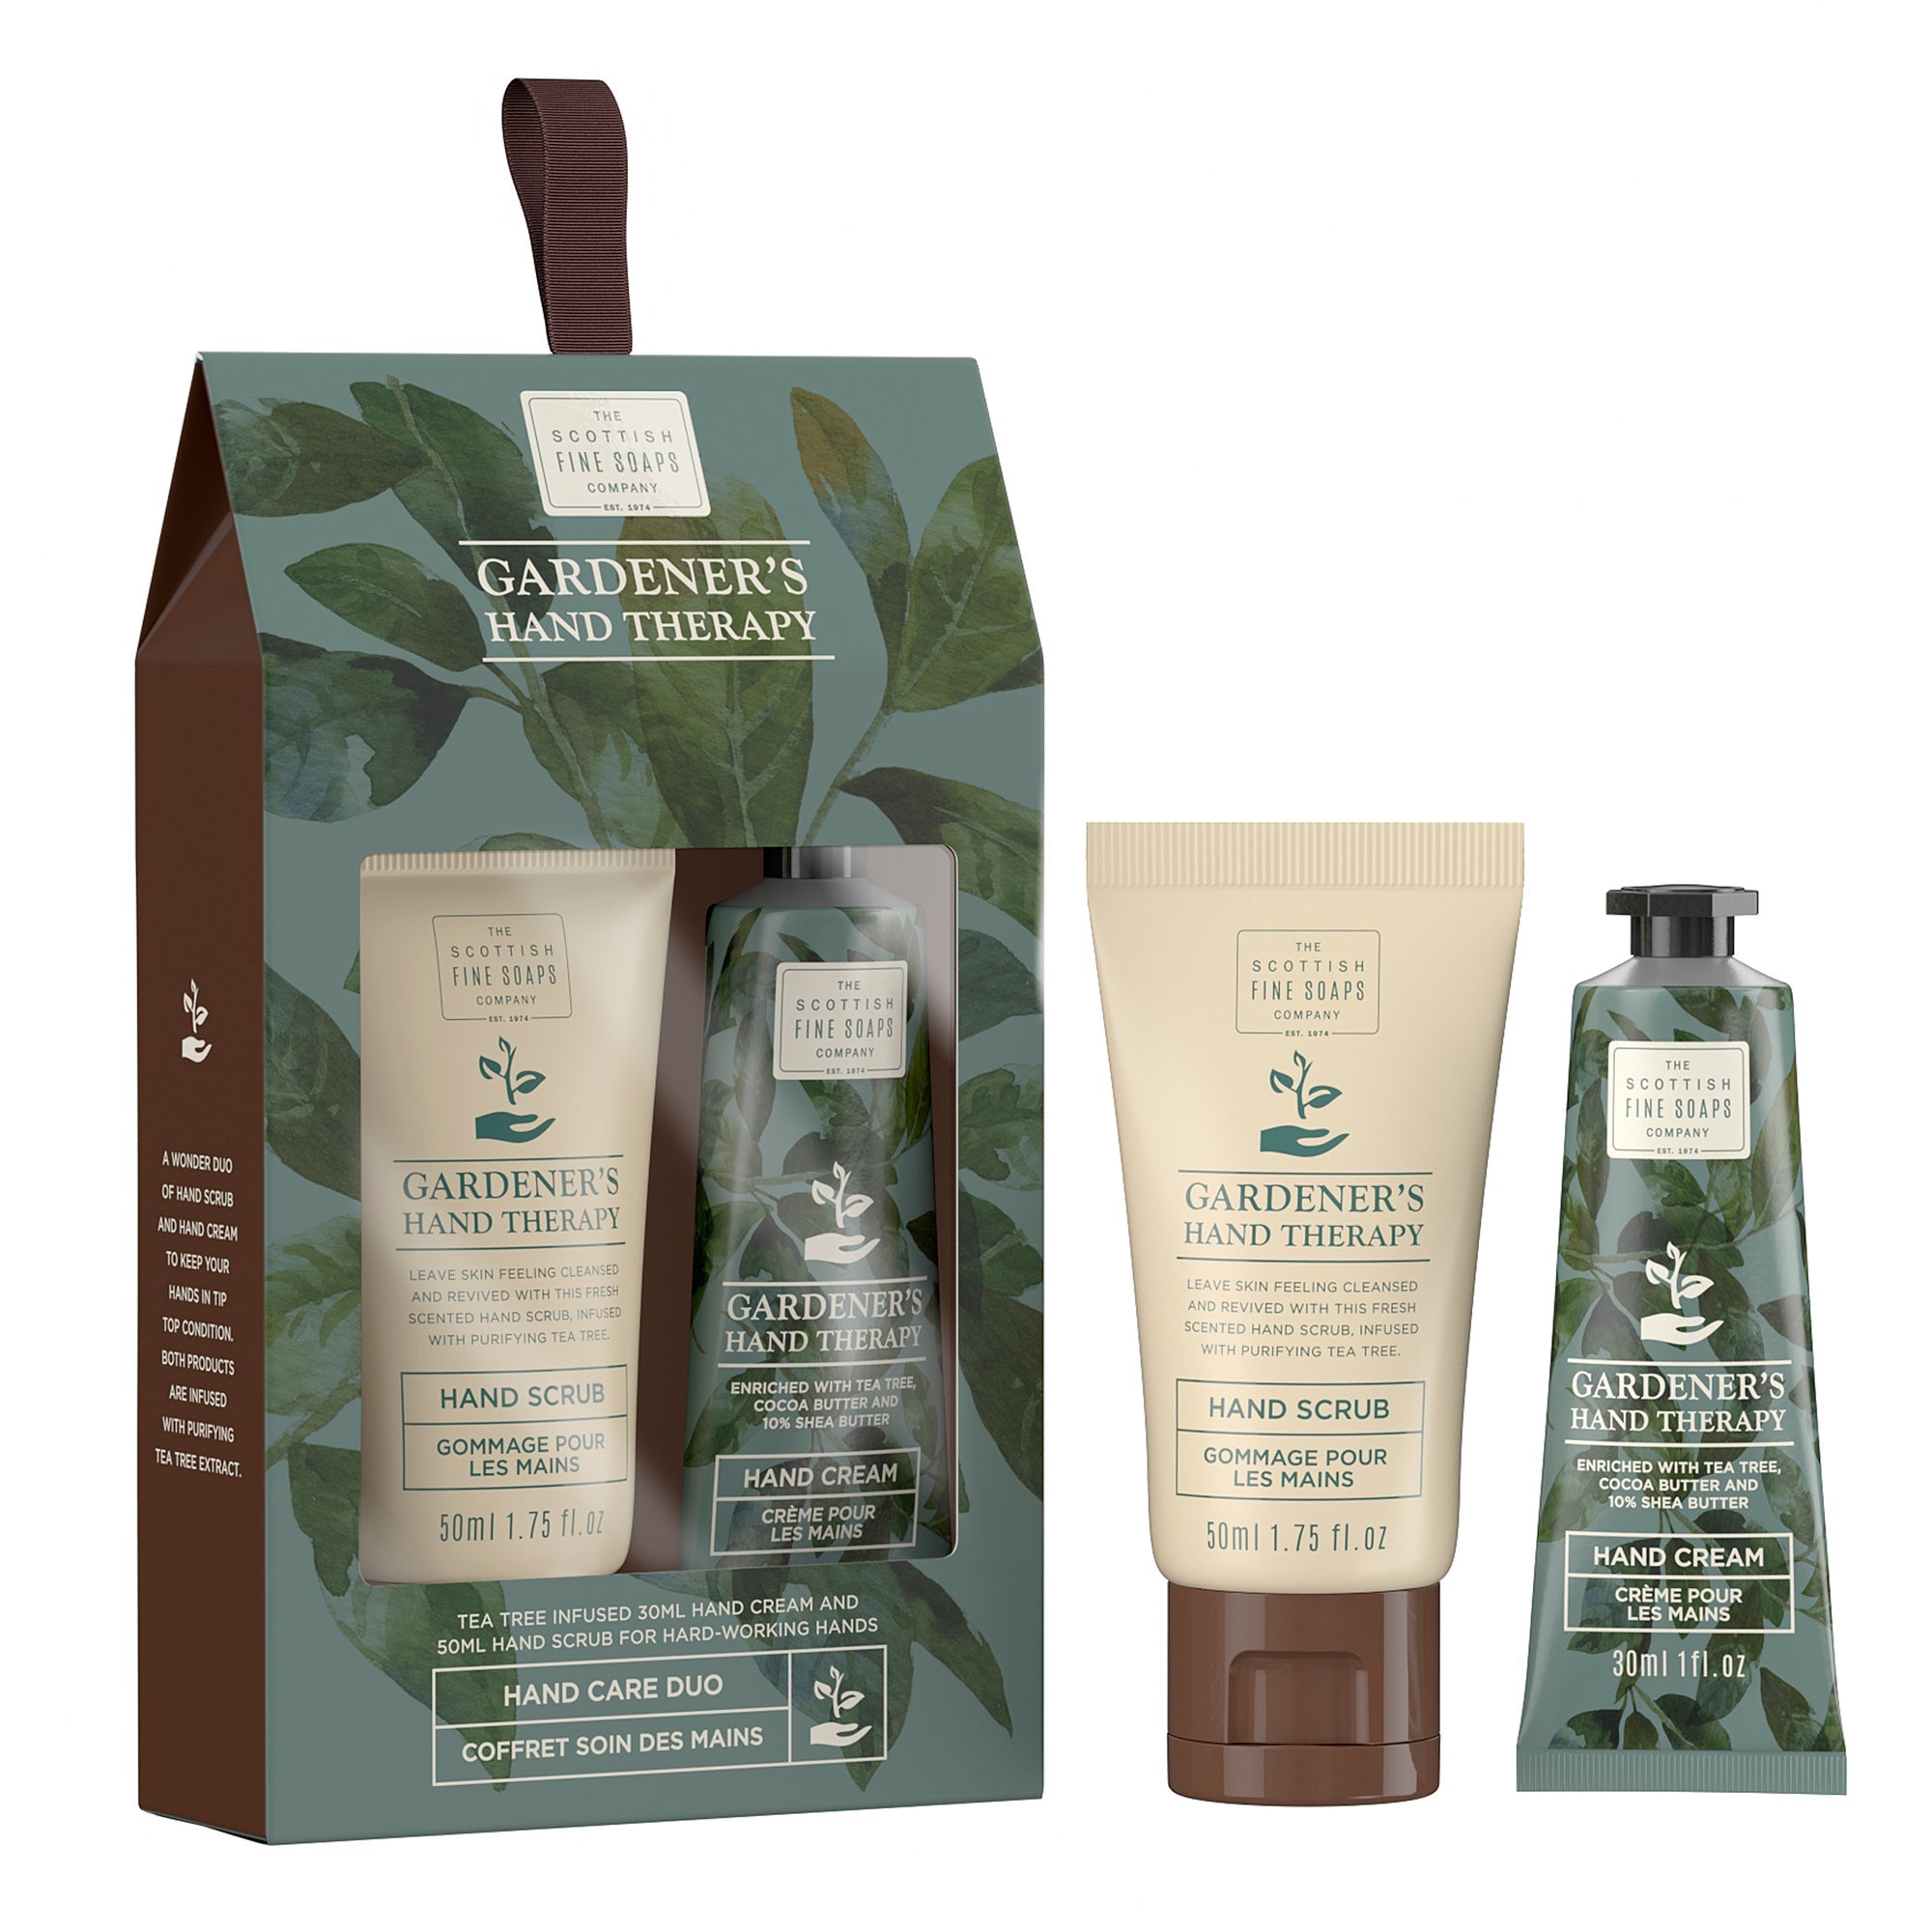 The Scottish Fine Soaps Company Gardener's Hand Therapy Hand Care Duo